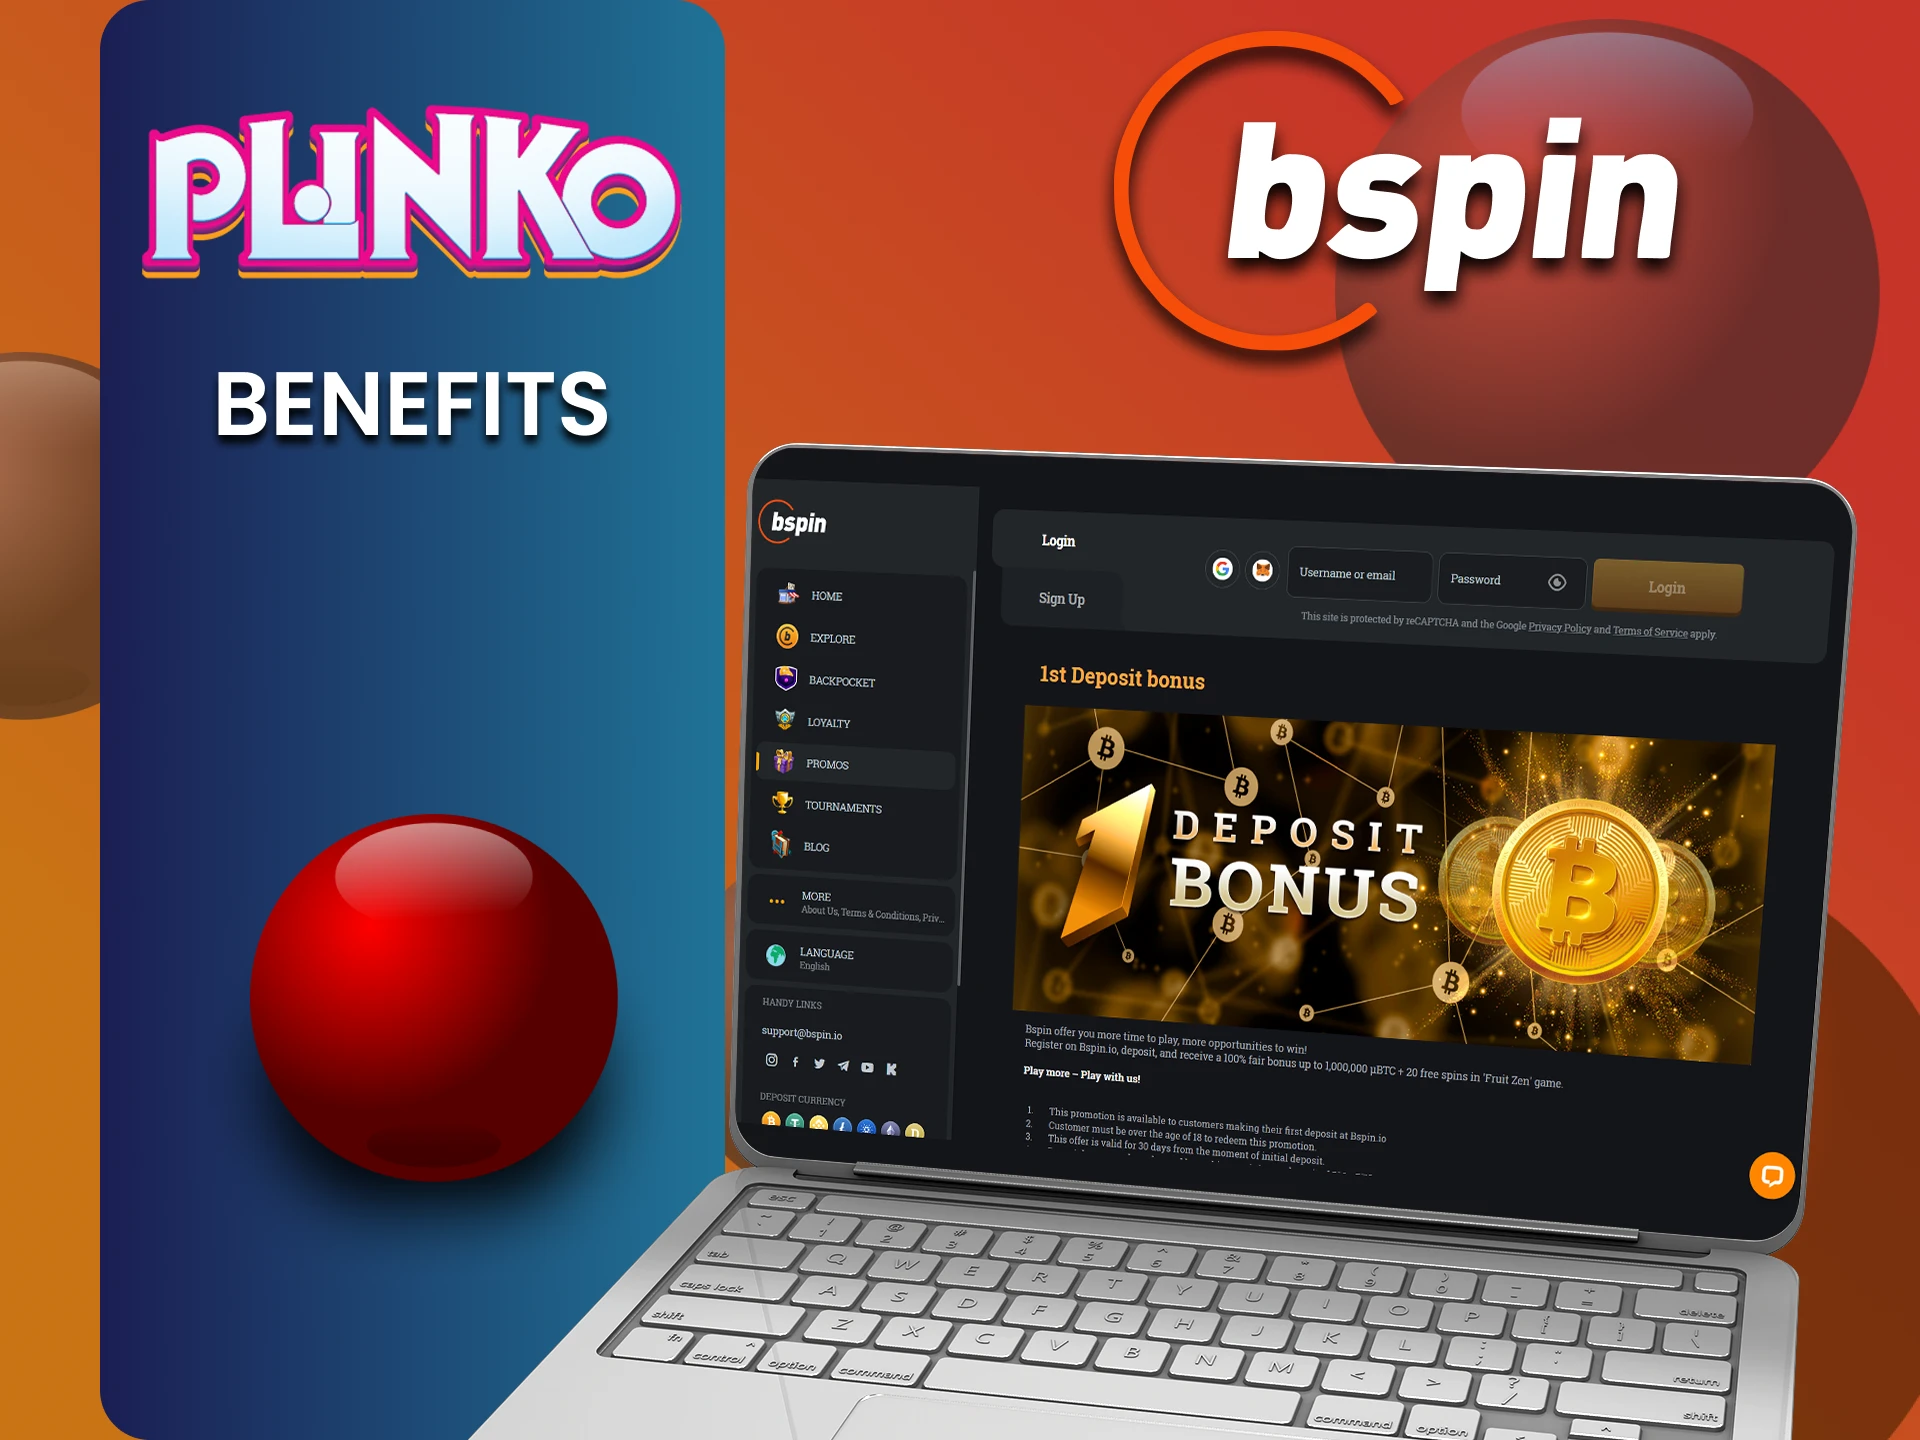 Lots of benefits await you in playing Plinko on Bspin.